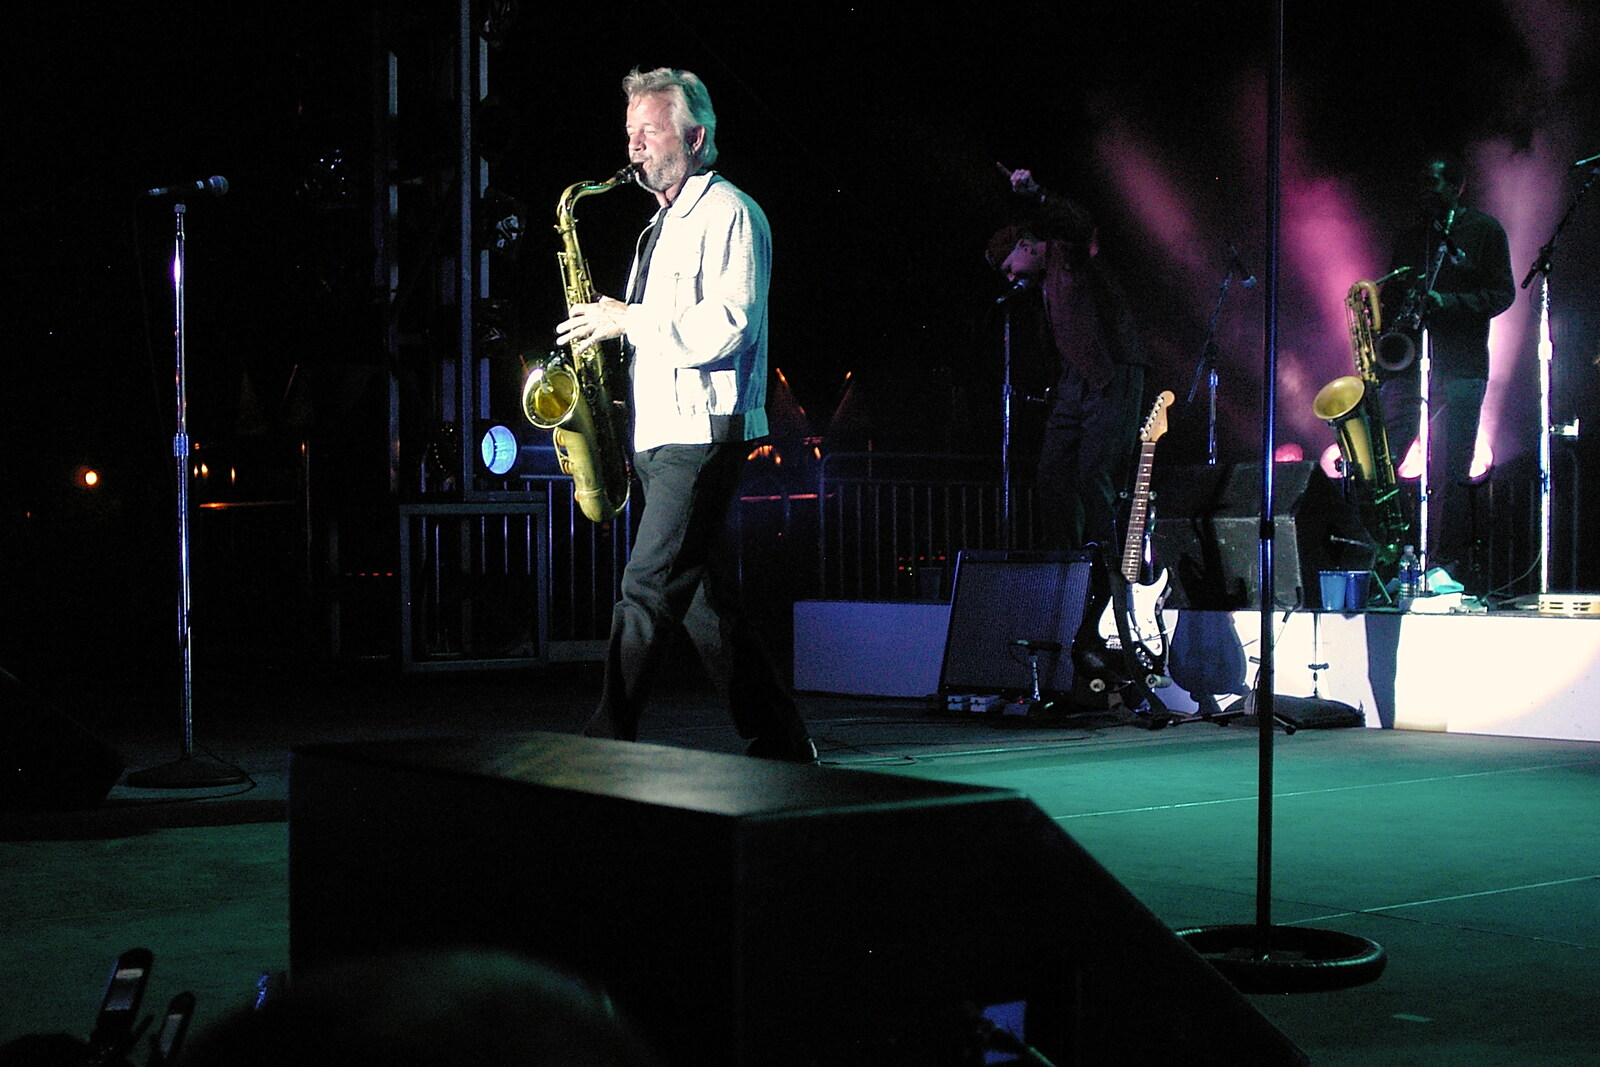 A saxaphone solo from BREW Fest and Huey Lewis and the News, Balboa Park, San Diego, California - 2nd June 2005